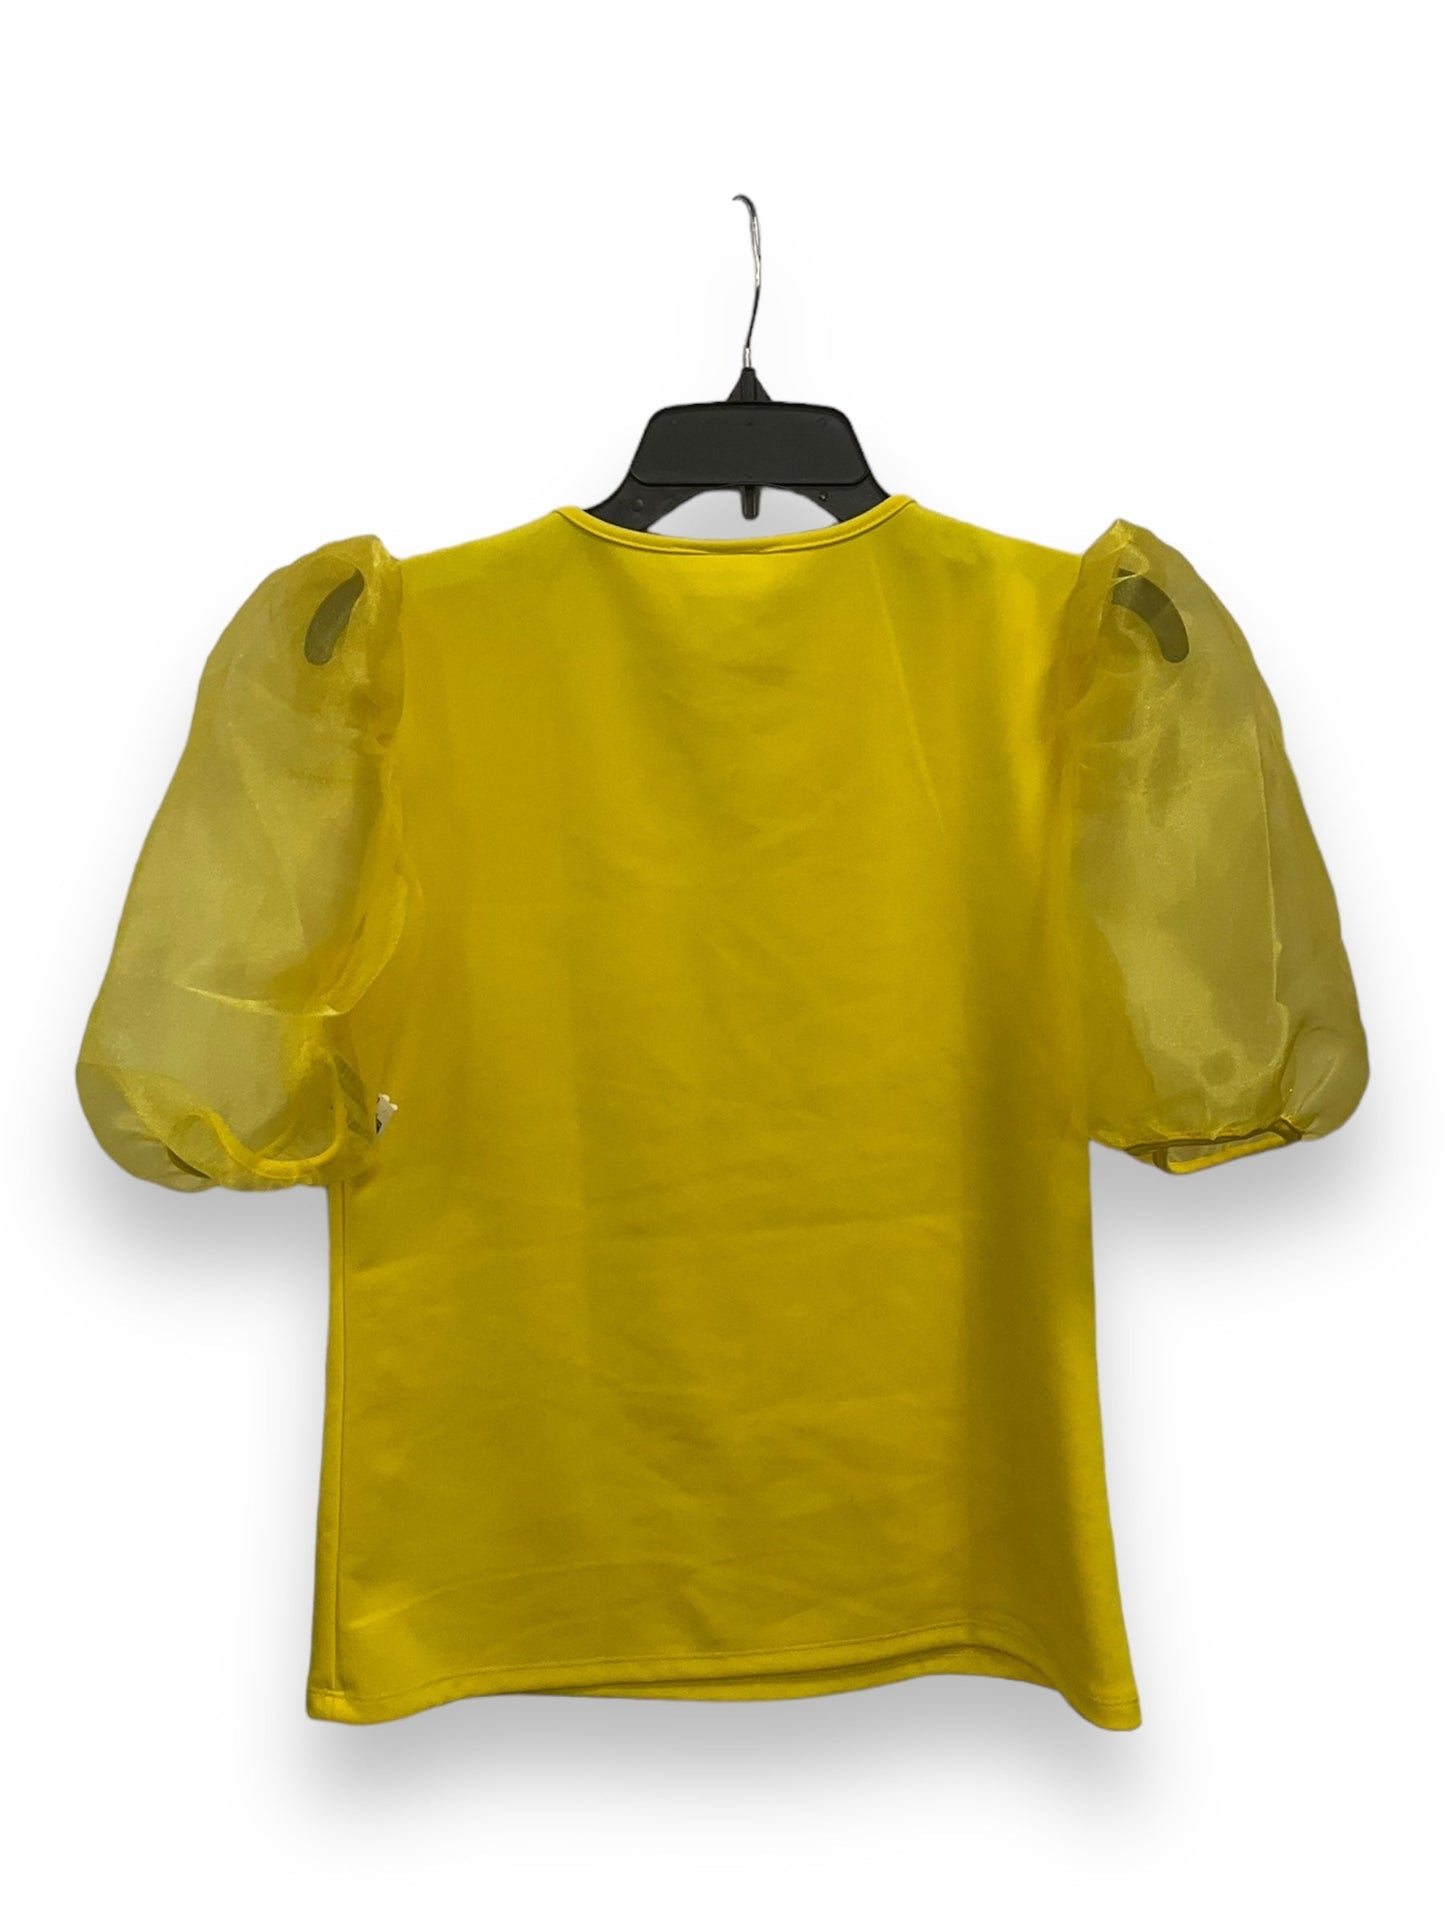 Yellow Top Short Sleeve Basic Clothes Mentor, Size M